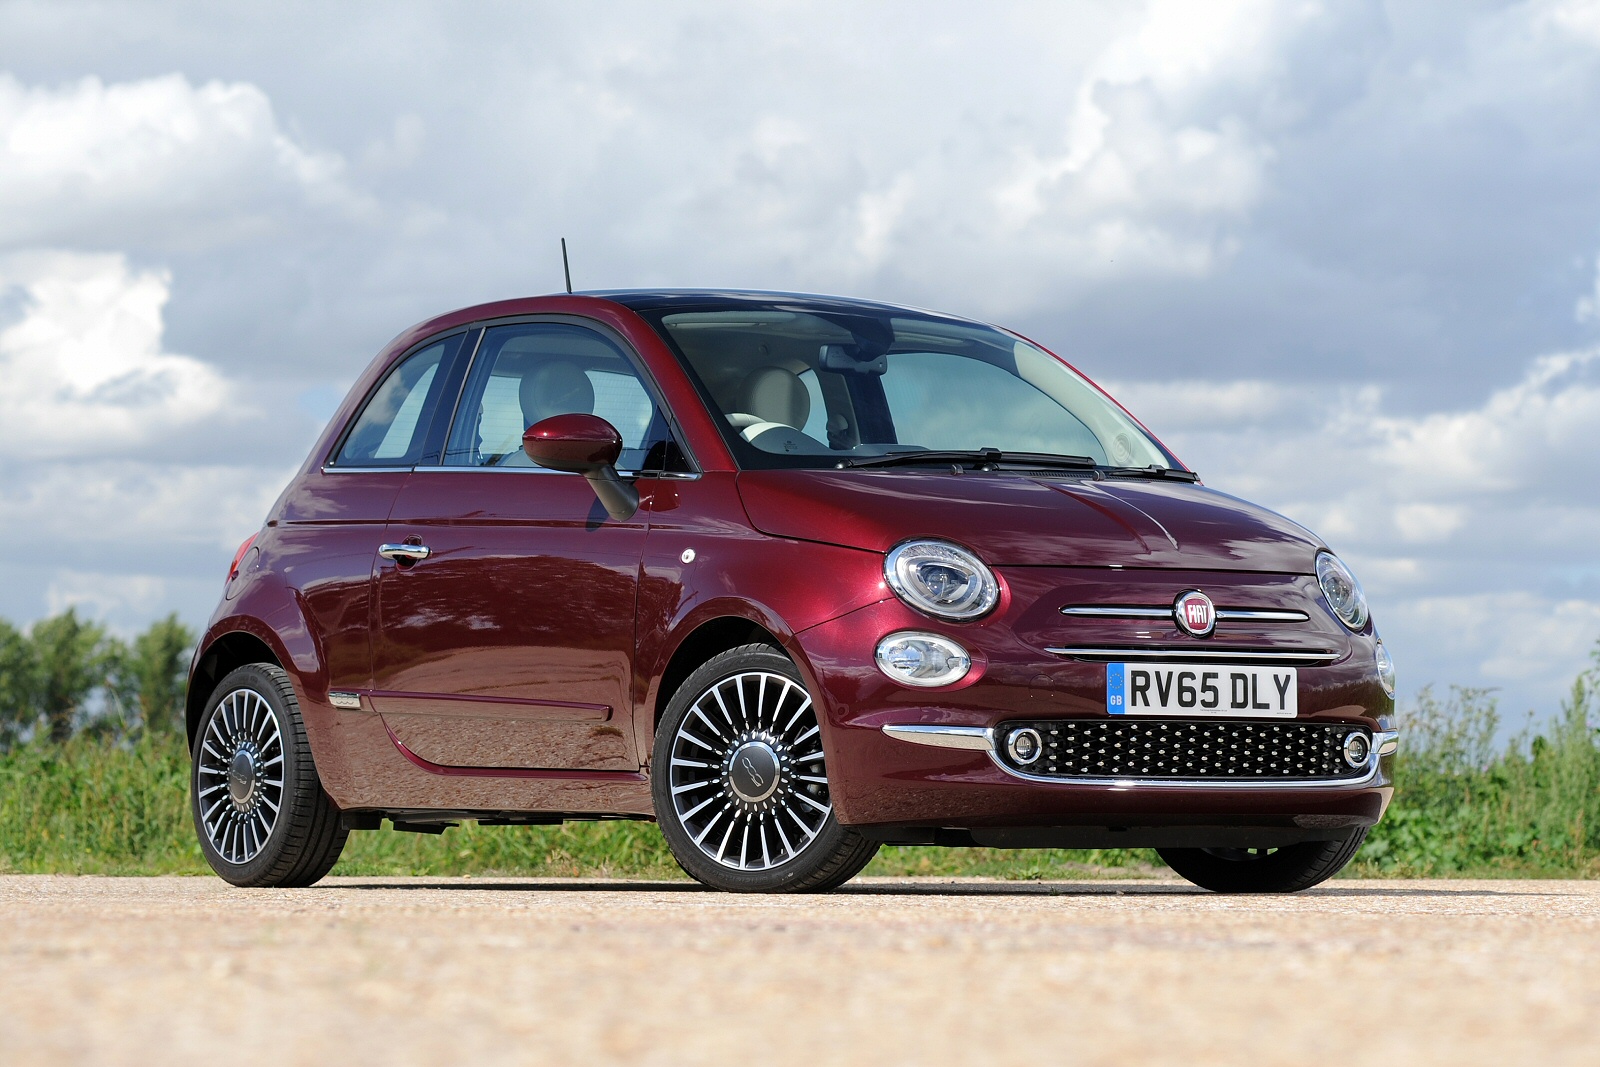 Purple Fiat 500 Off Road With Grass In The Background